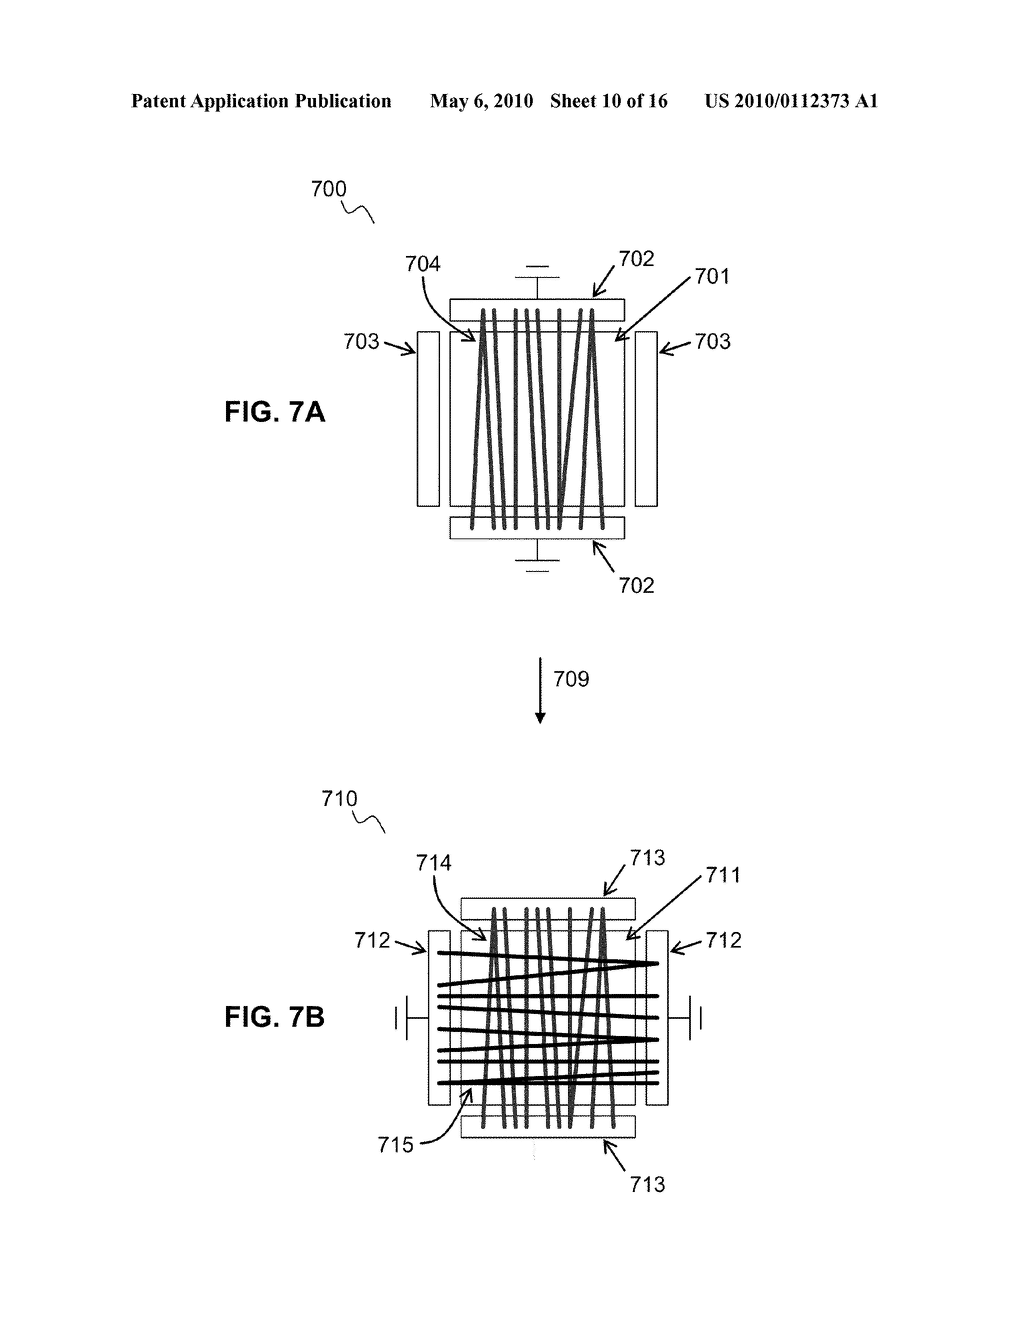 Anti-Reflective Coatings Comprising Ordered Layers of Nanowires and Methods of Making and Using the Same - diagram, schematic, and image 11